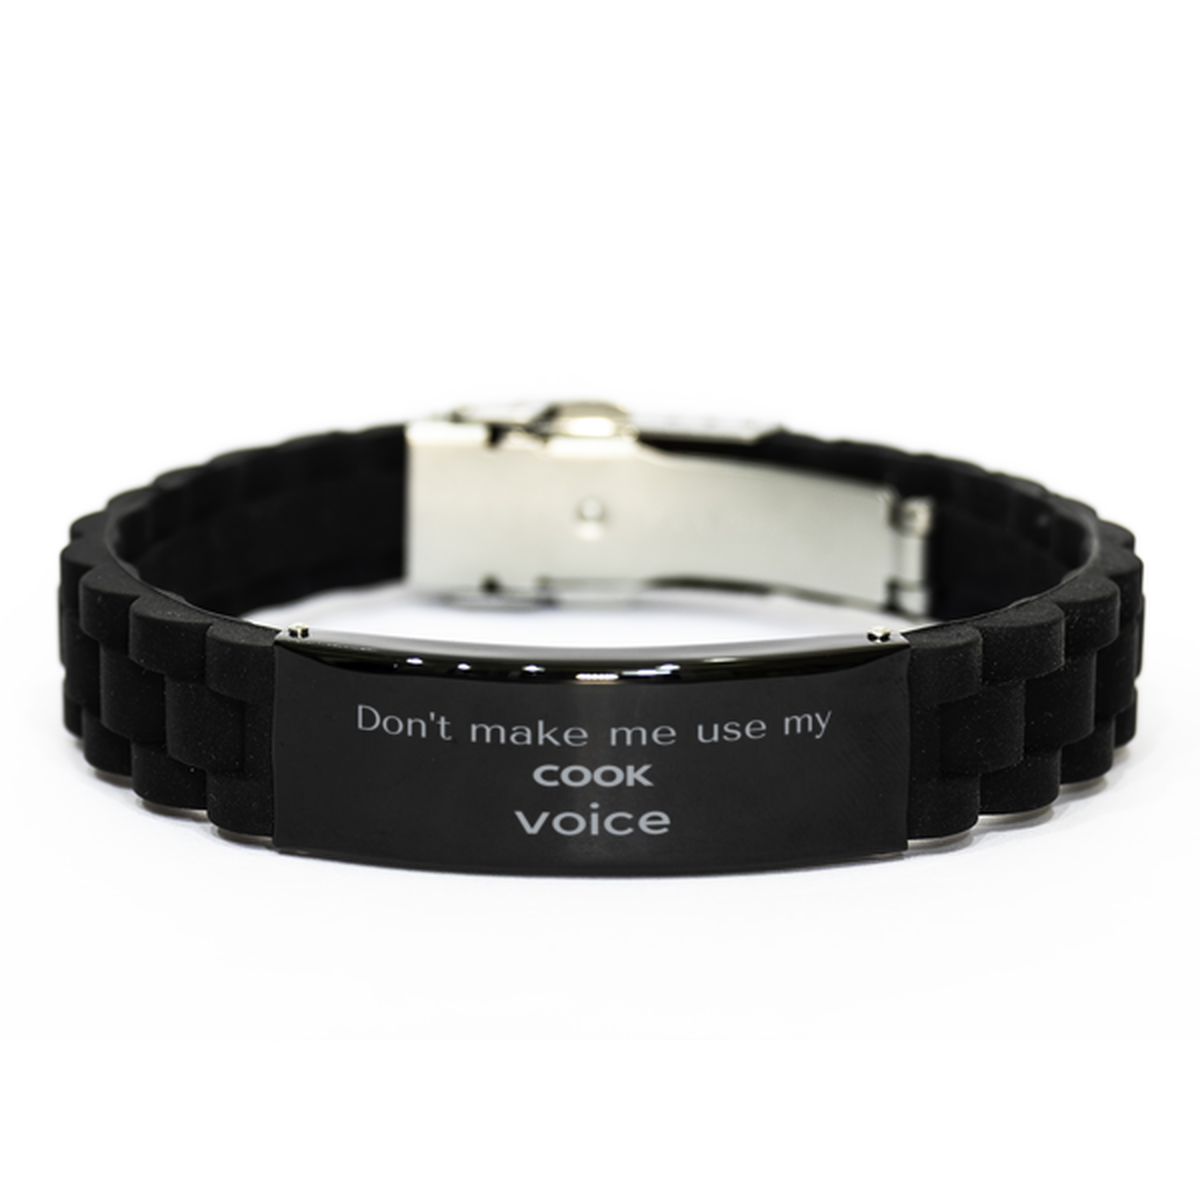 Don't make me use my Cook voice, Sarcasm Cook Gifts, Christmas Cook Black Glidelock Clasp Bracelet Birthday Unique Gifts For Cook Coworkers, Men, Women, Colleague, Friends